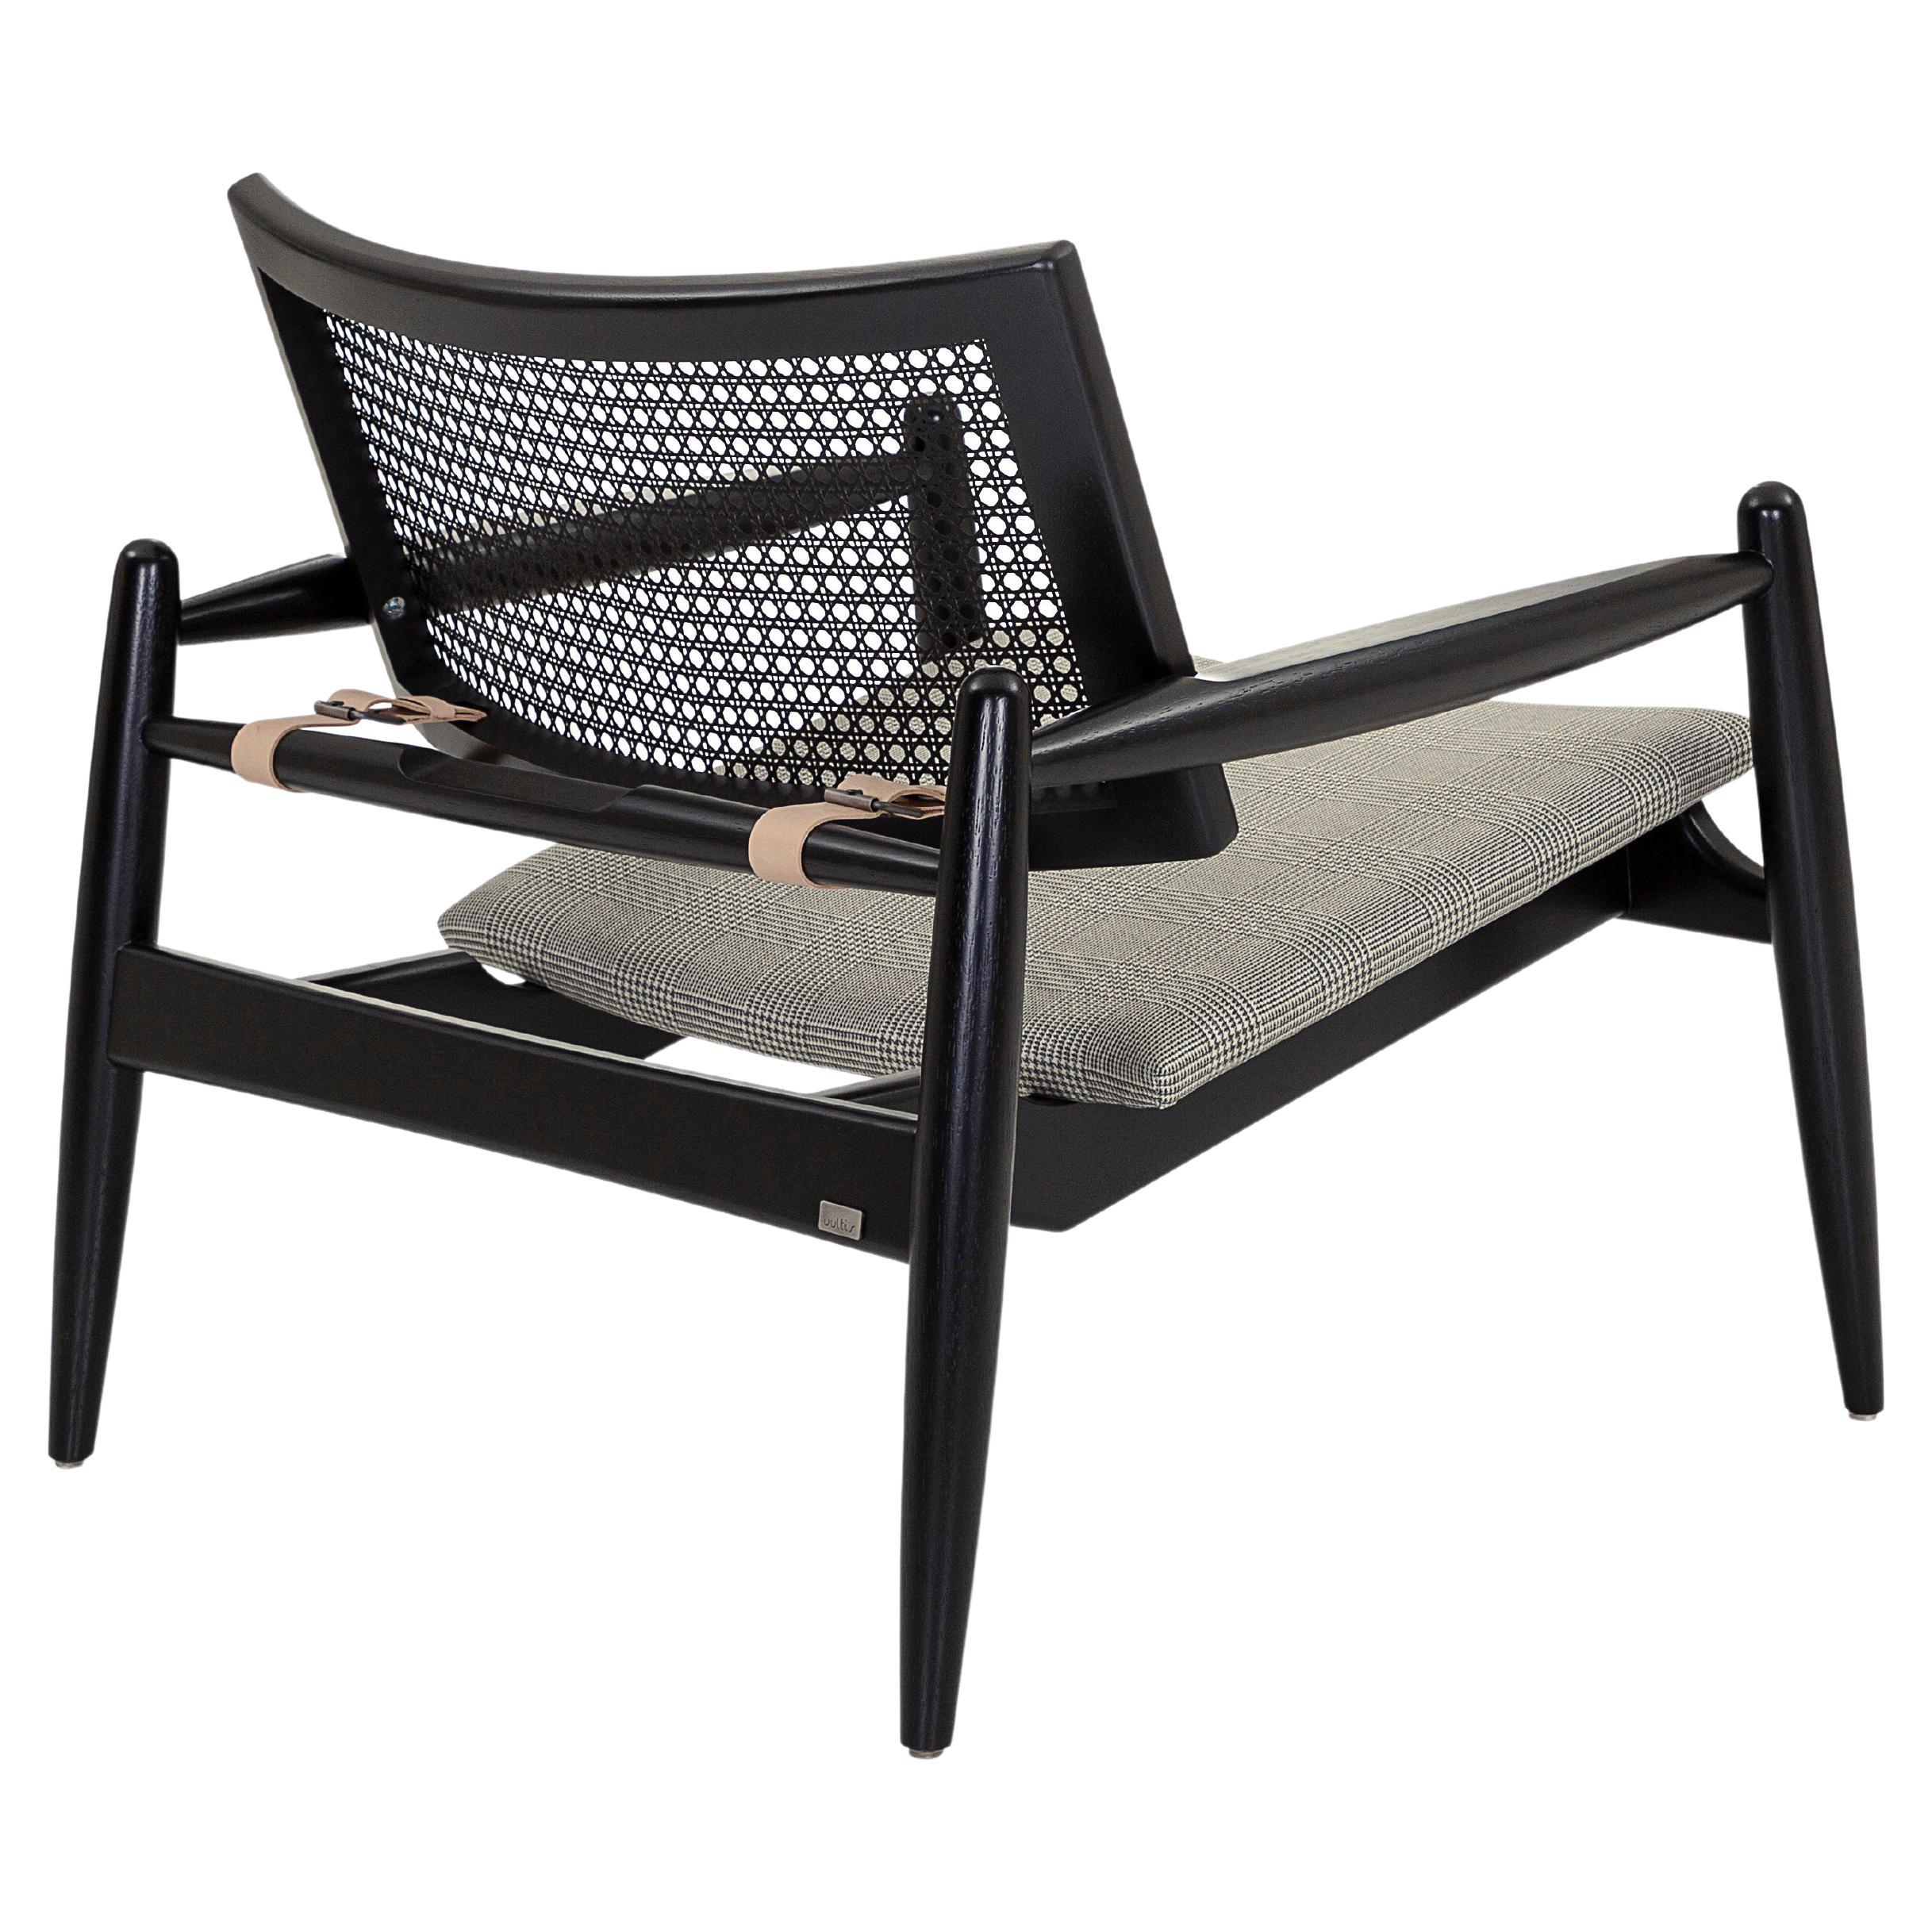 Uultis Design Lounge Chairs